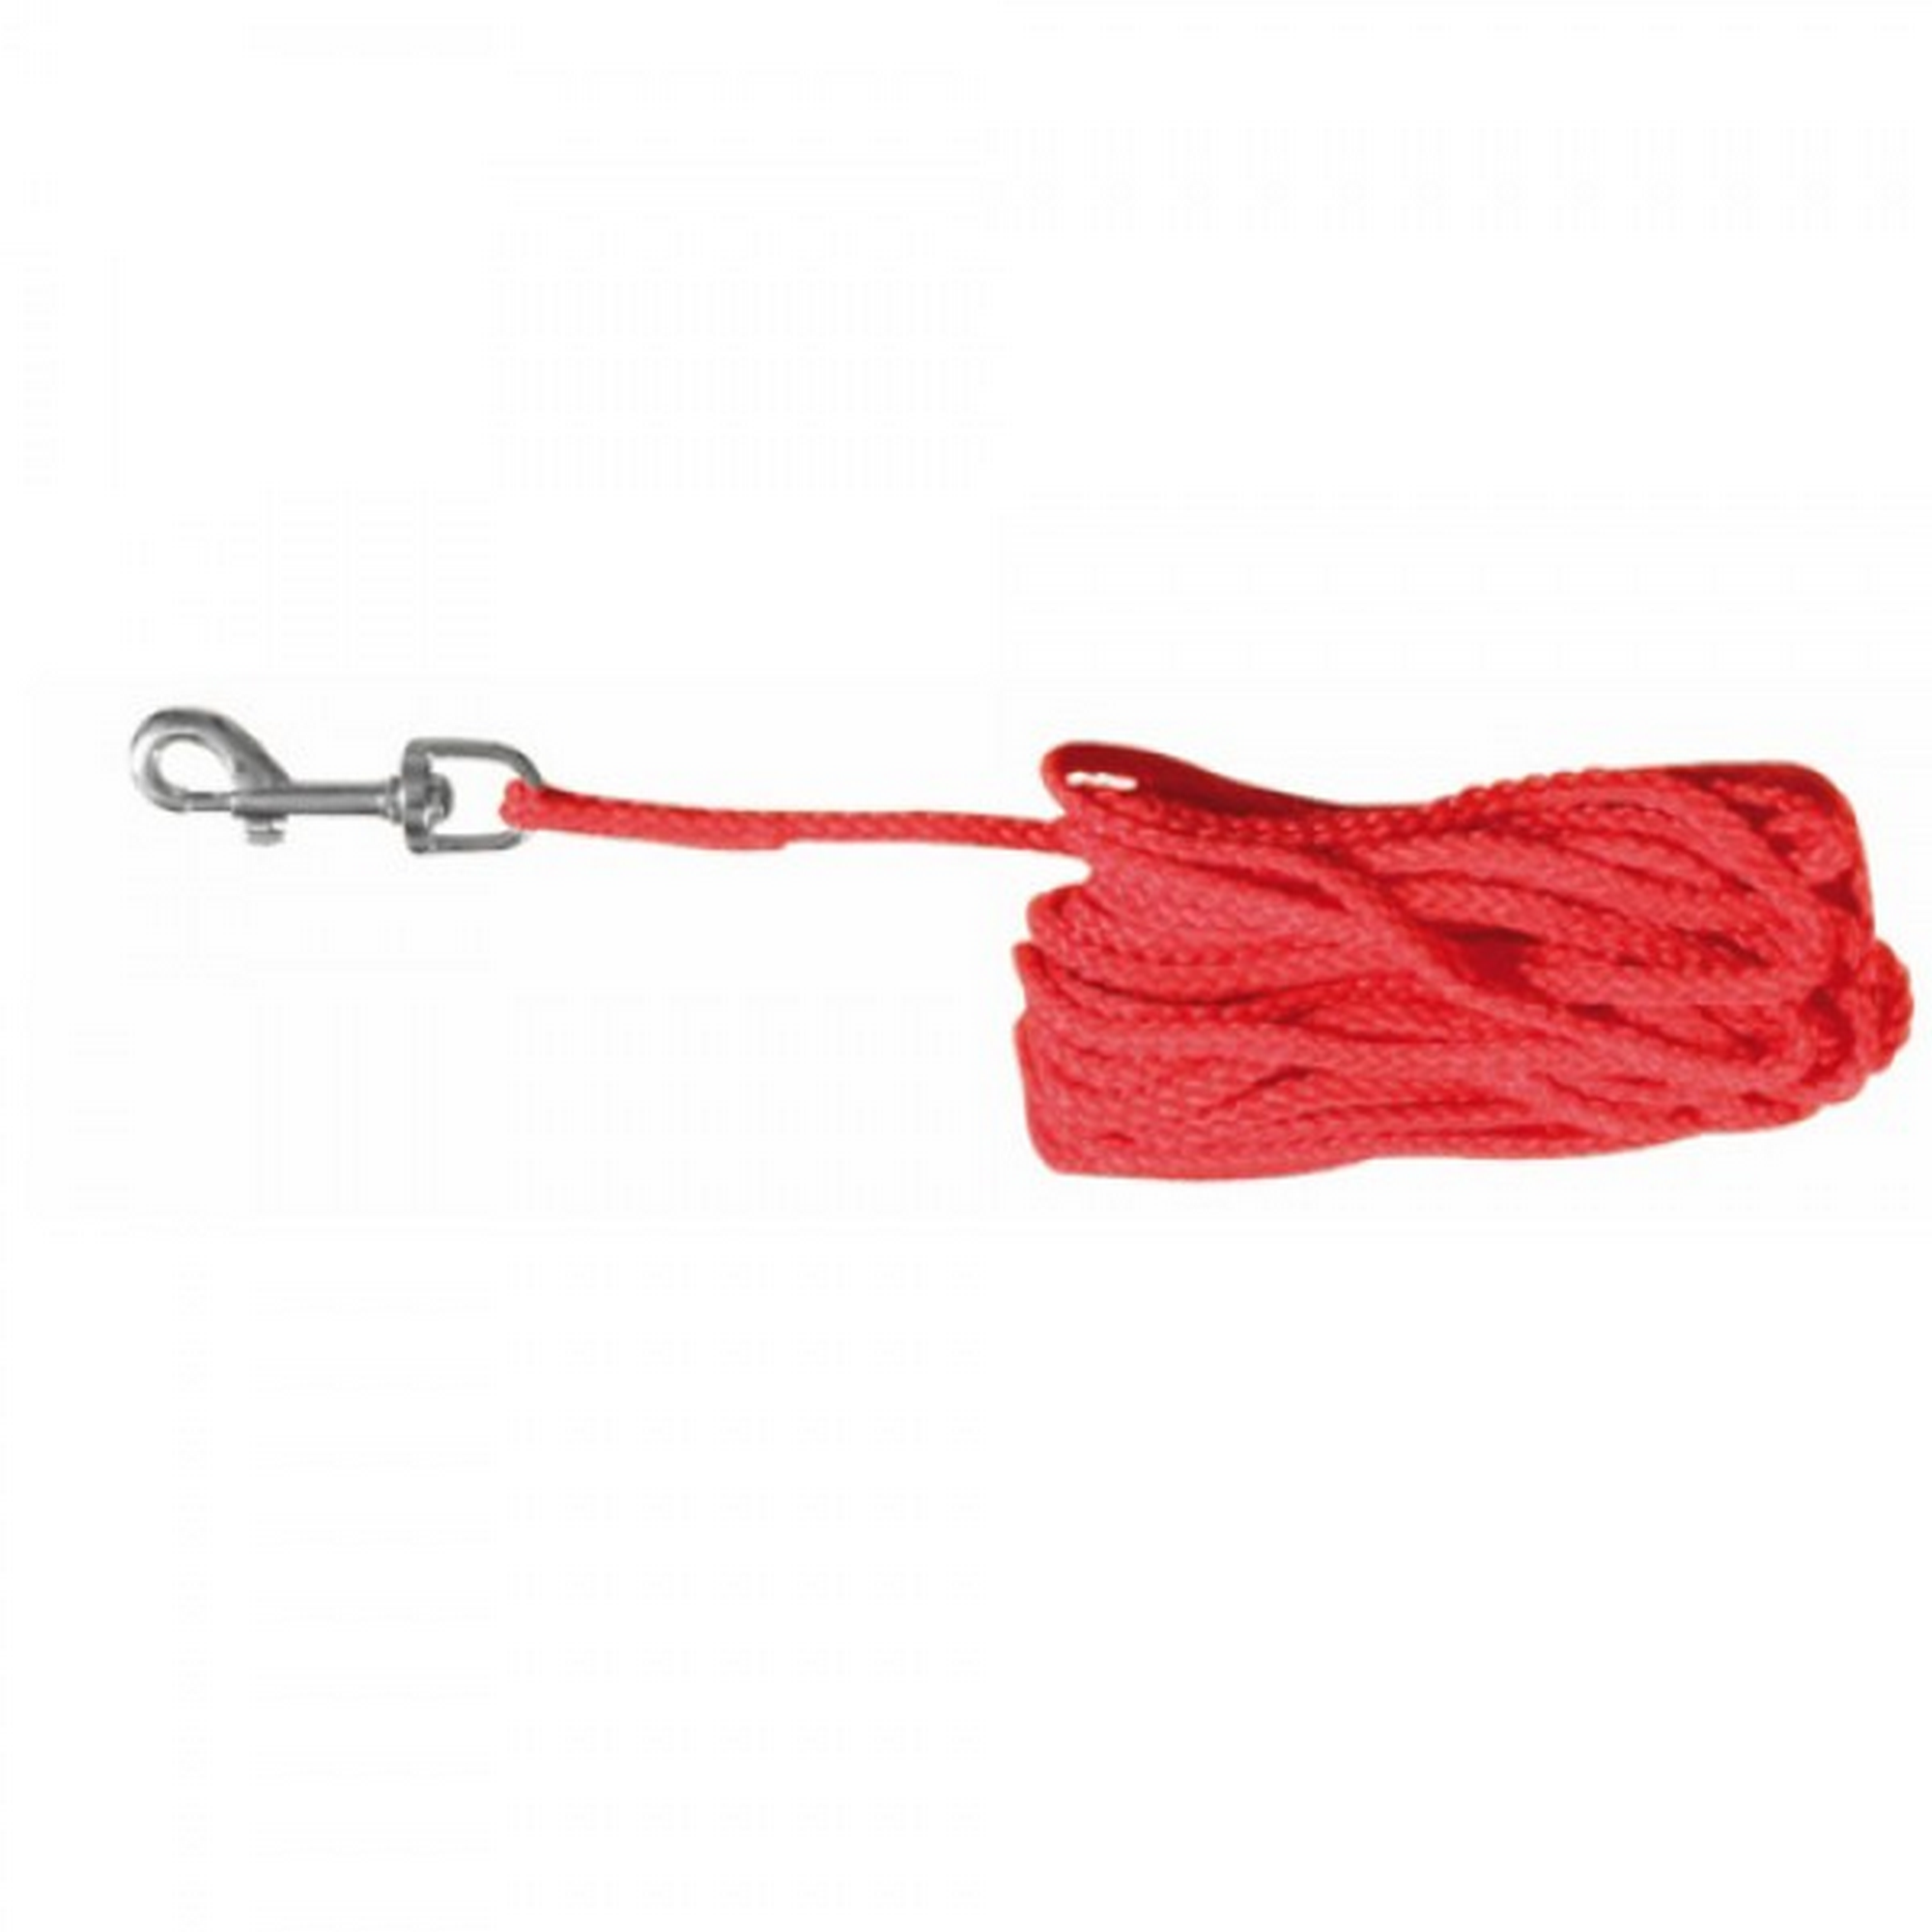 Hunde-Schleppleine rot 15 m + product picture